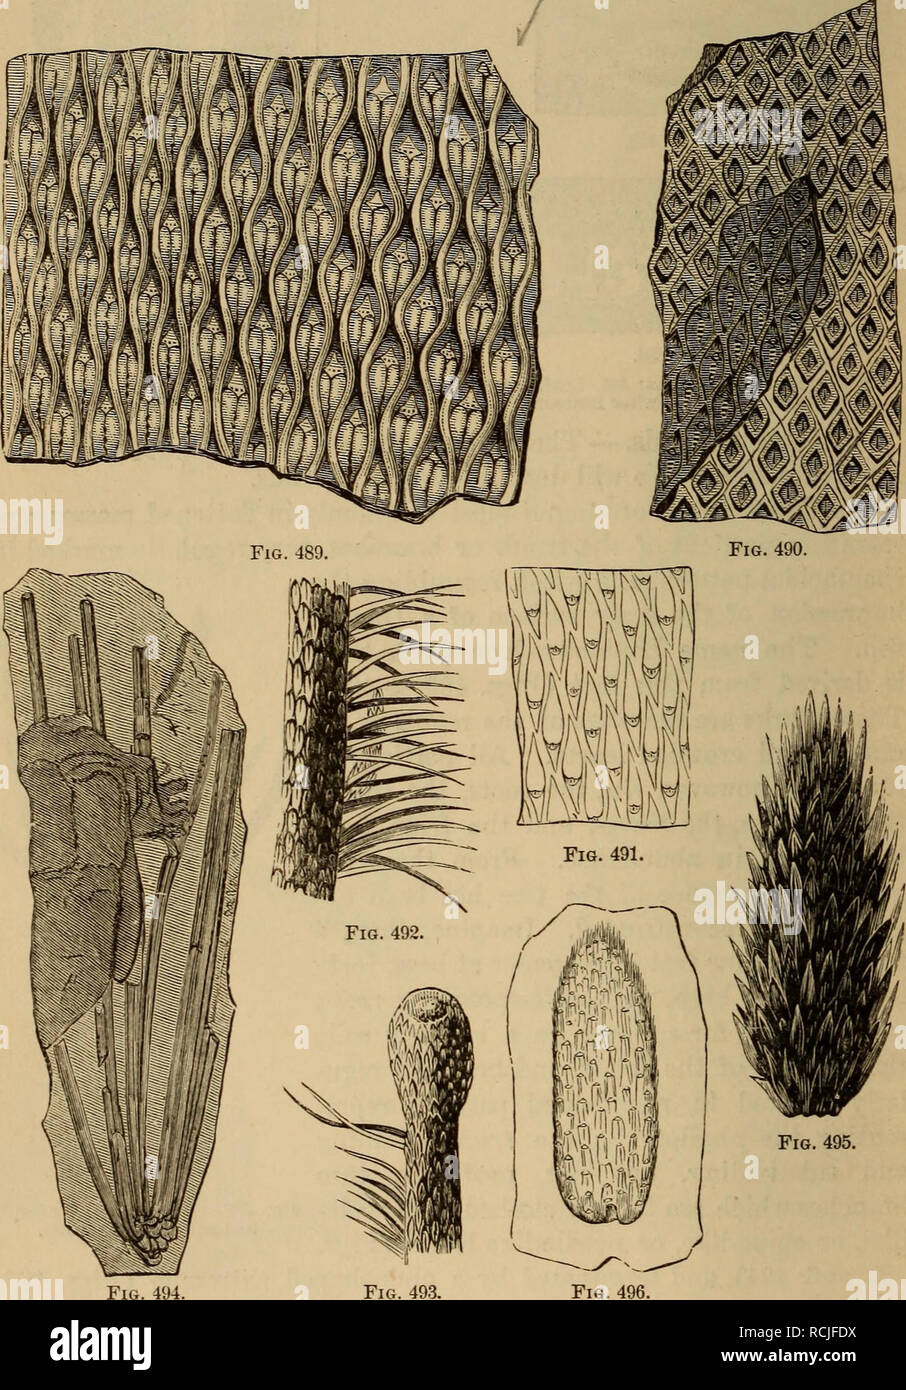 . Elements of geology : a text-book for colleges and for the general reader. Geology. 366 PALAEOZOIC SYSTEM OF KOCKS. The general appearance of the tree is that of an Araucarian conifer, or of a gigantic club-moss. The fruit, however, turns the scale of affin- ity in favor of the club-moss; for the examination of these, which are. Fig. 494. Figs. 489-496—Lepidodexdrids: 489. Lepidodendron modulatum (after Lesquereux). 490. Lepi- dodendron diplotegioides (after Lesquereux). 491. Lepidodendron politum (after Lesquereux). 492. Lepidodendron corrugatum, branch and leaves (after Dawscn). 493. Lepid Stock Photo